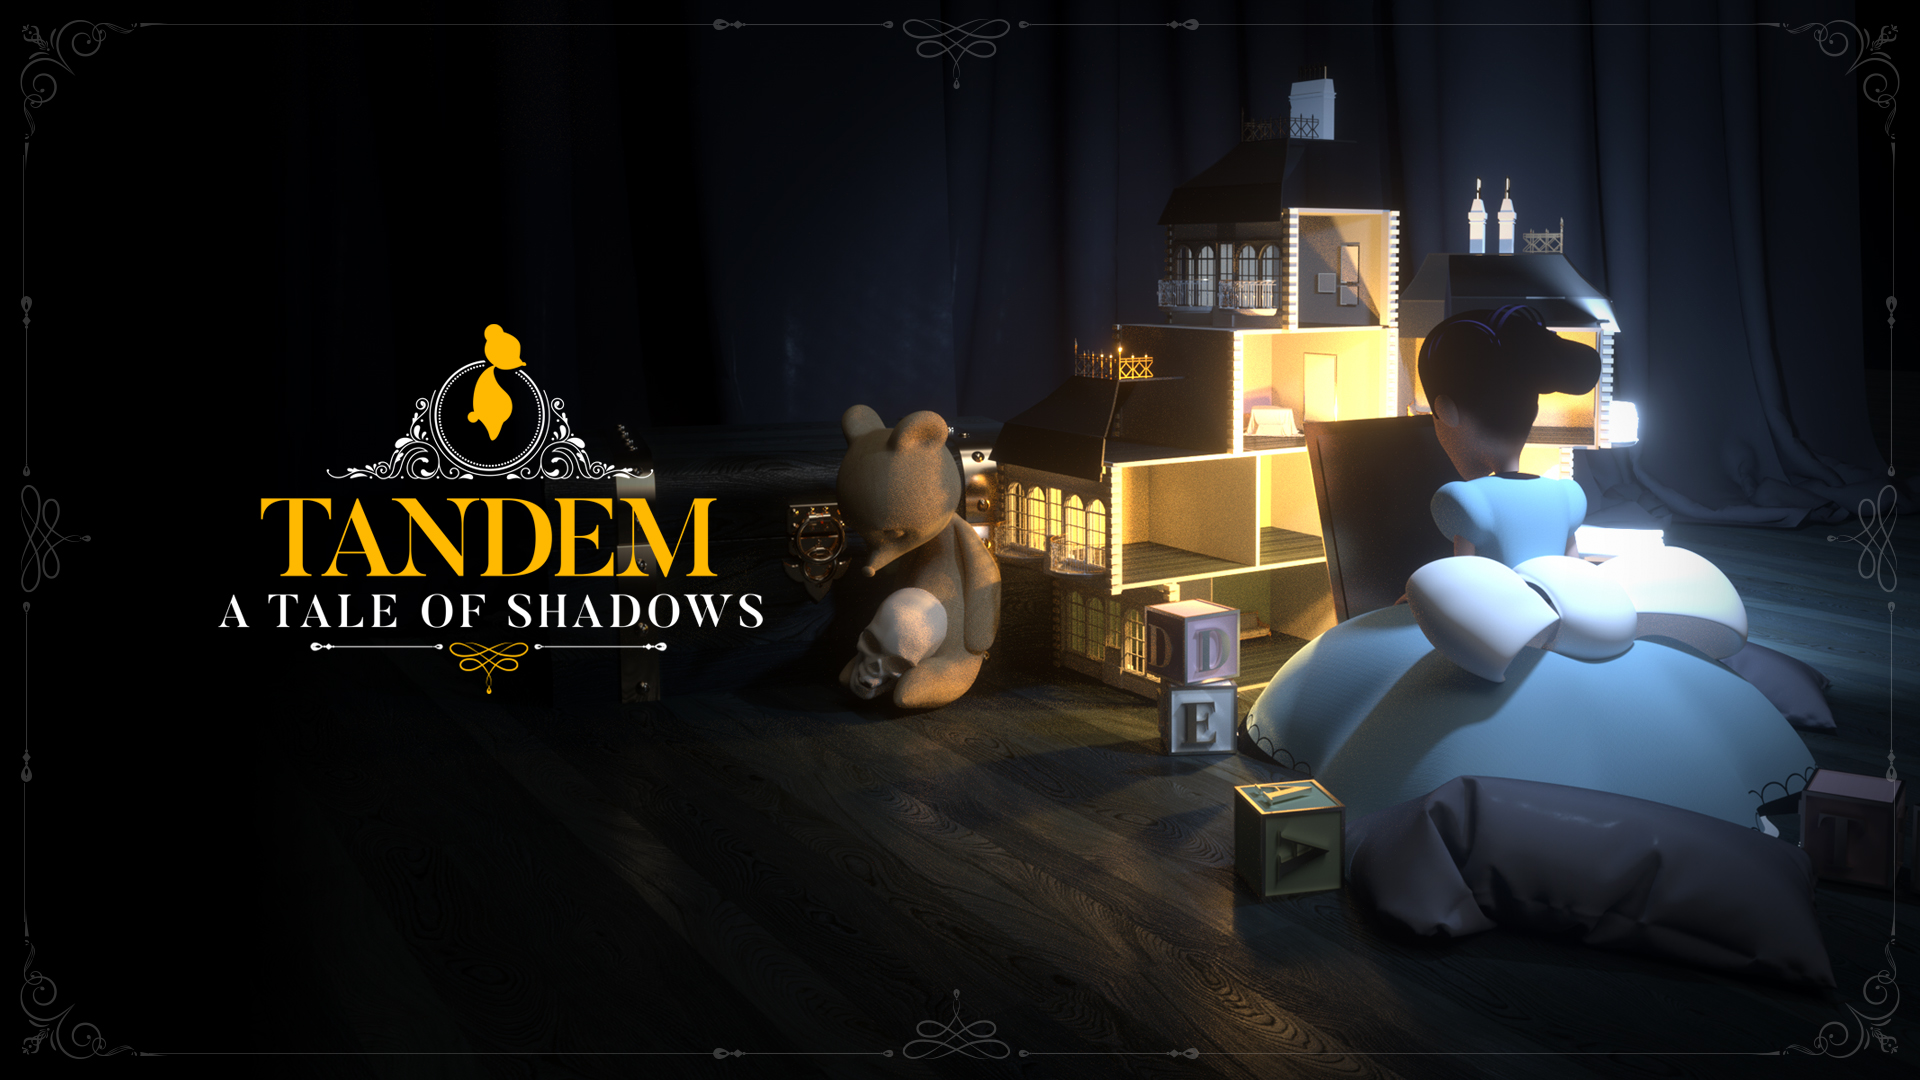 Tandem: A Tale of Shadows reveals the daring duo of its character